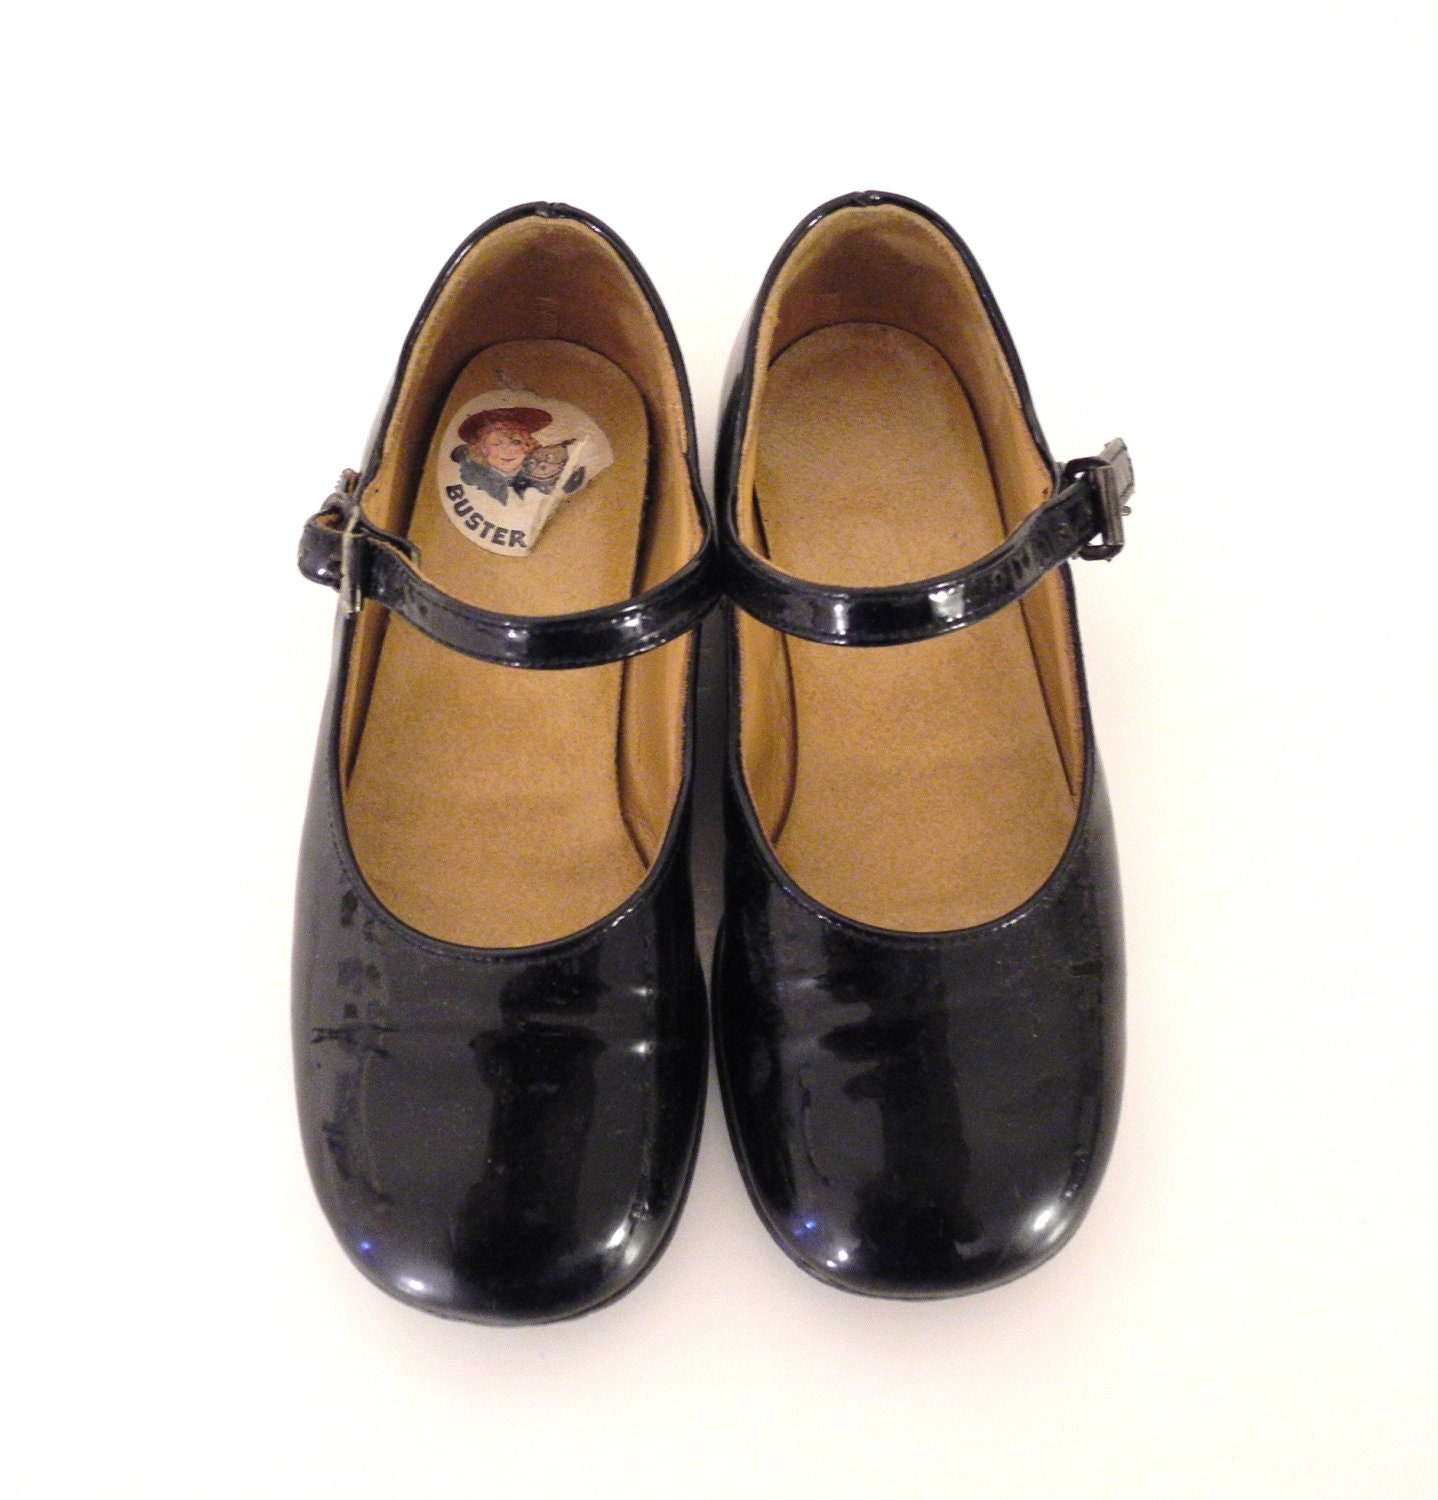 Vintage Baby Shoes 1960's Black Patent Leather Mary Jane